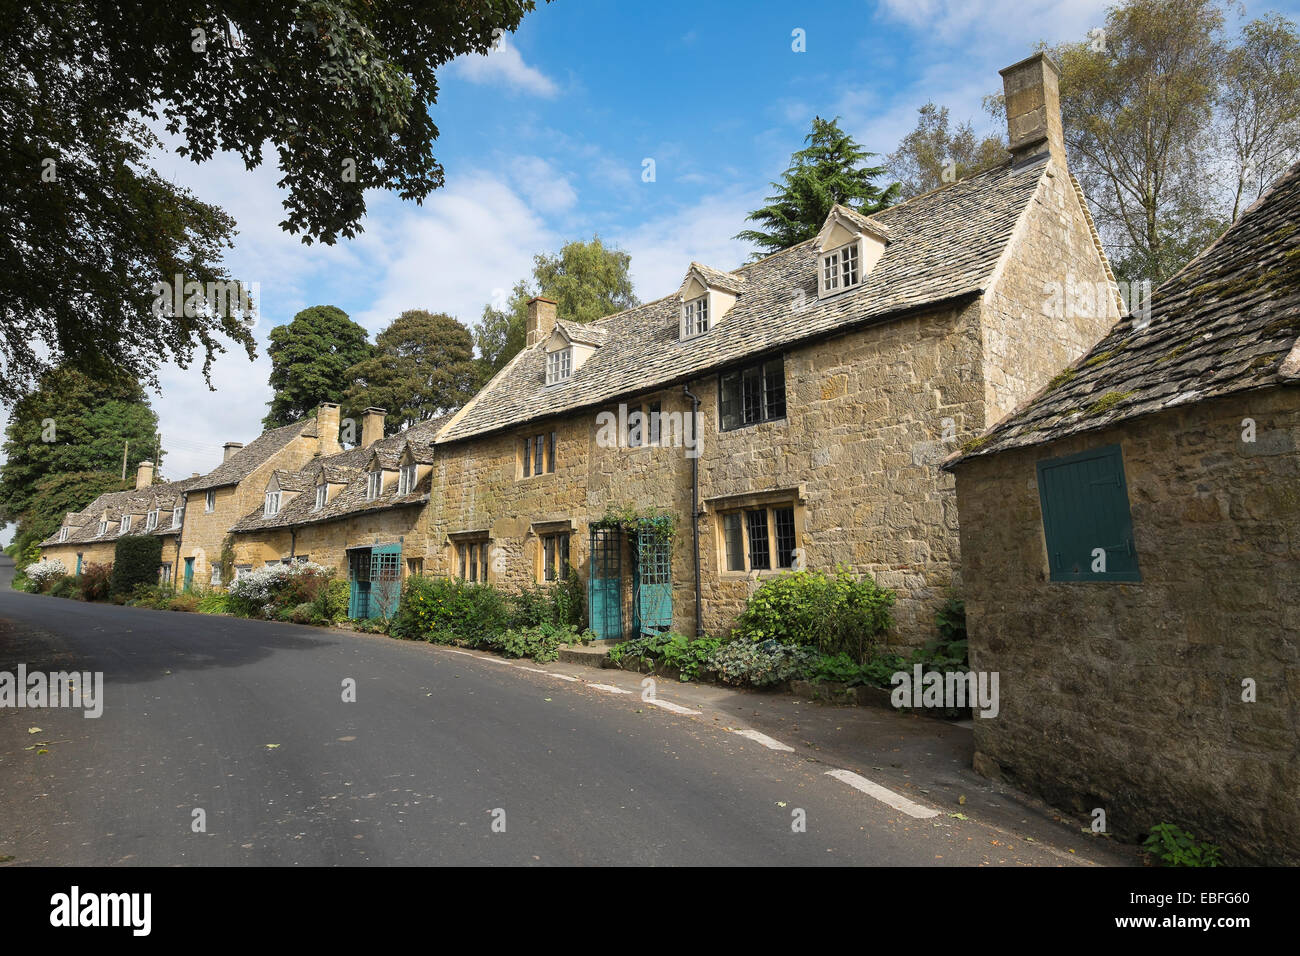 Snowshill manor holiday cottages Snowshill village The Cotswolds Gloucestershire England Stock Photo